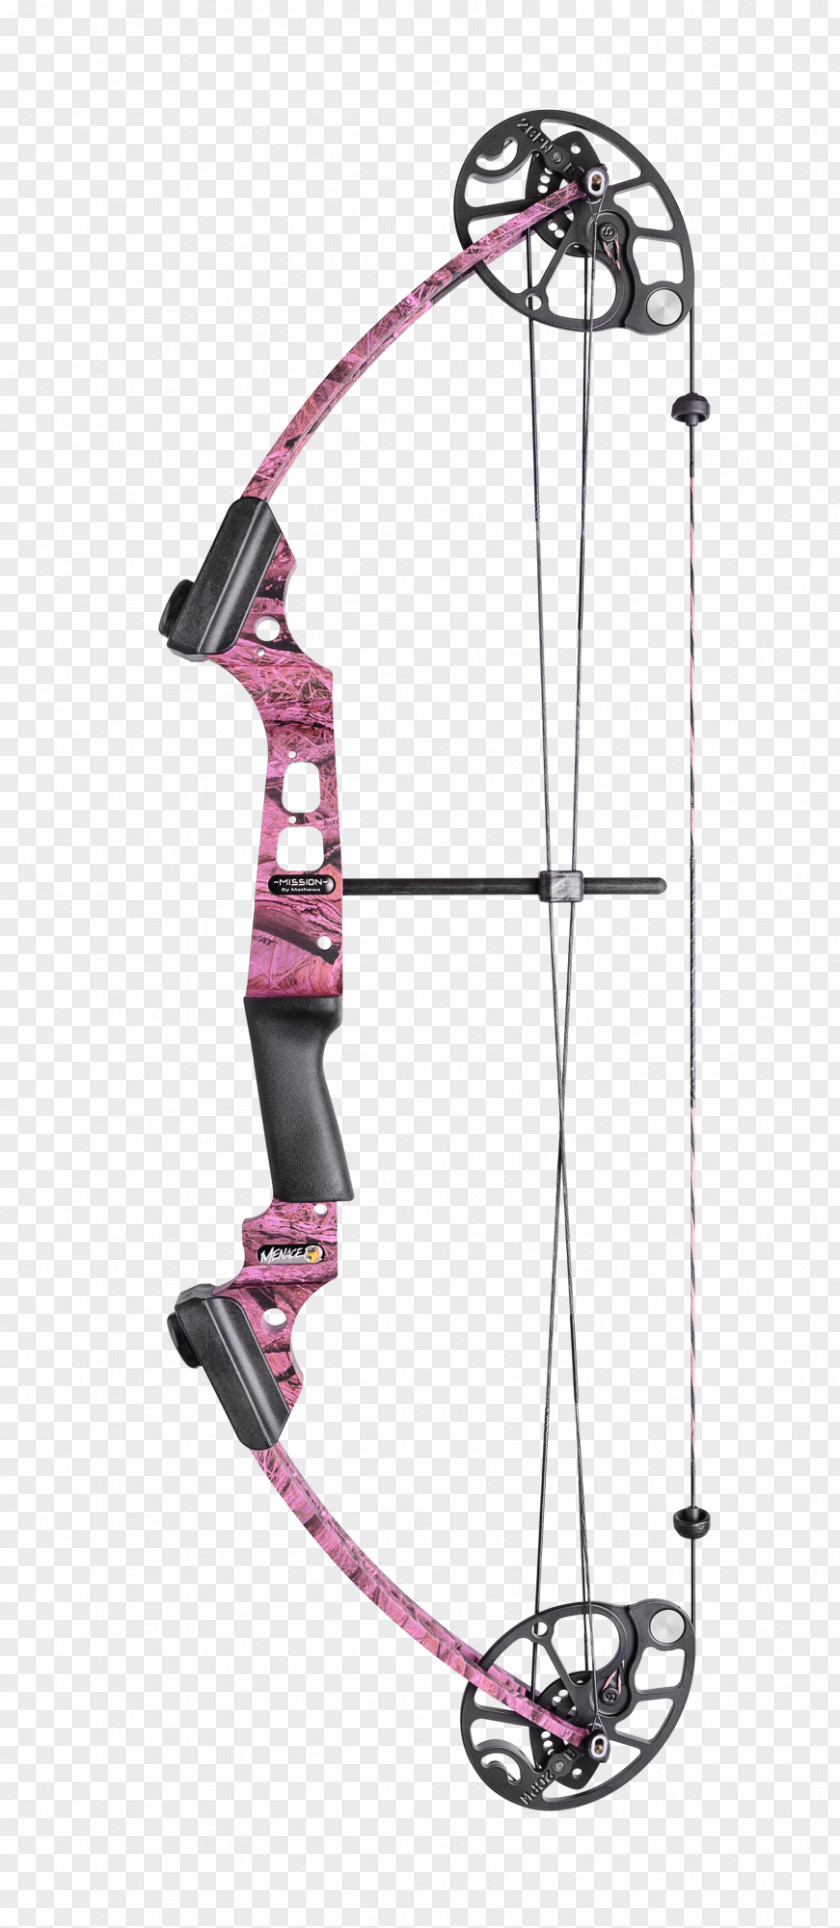 Hunters Choice Archery Pro Shop Hunting Bow And Arrow Compound Bows Mission Statement PNG